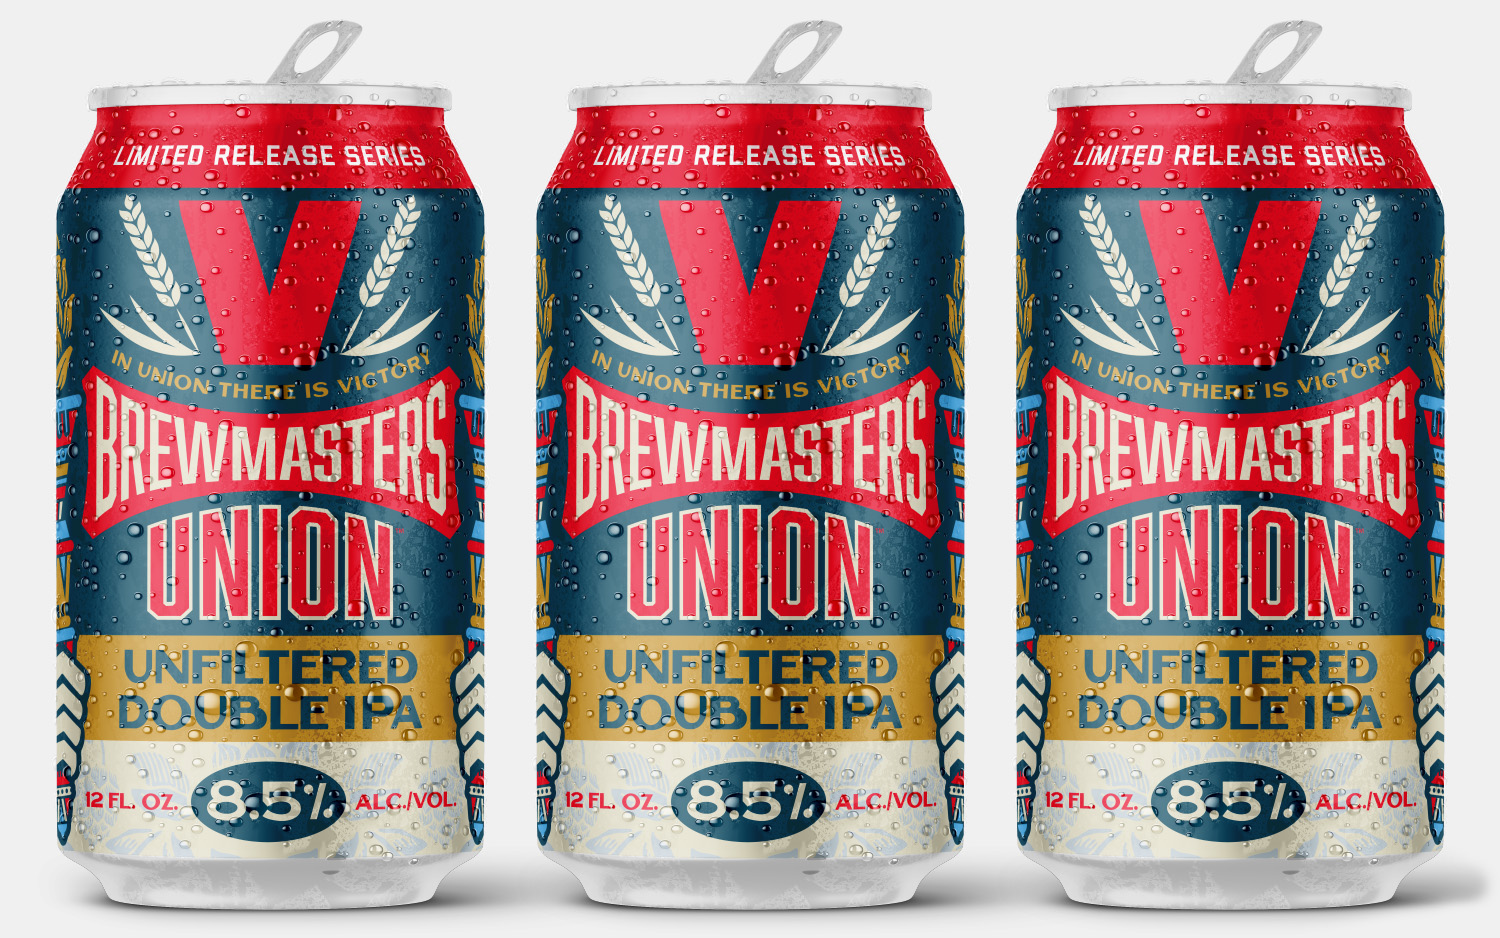 Victory Brewmasters Union Unfiltered Double IPA